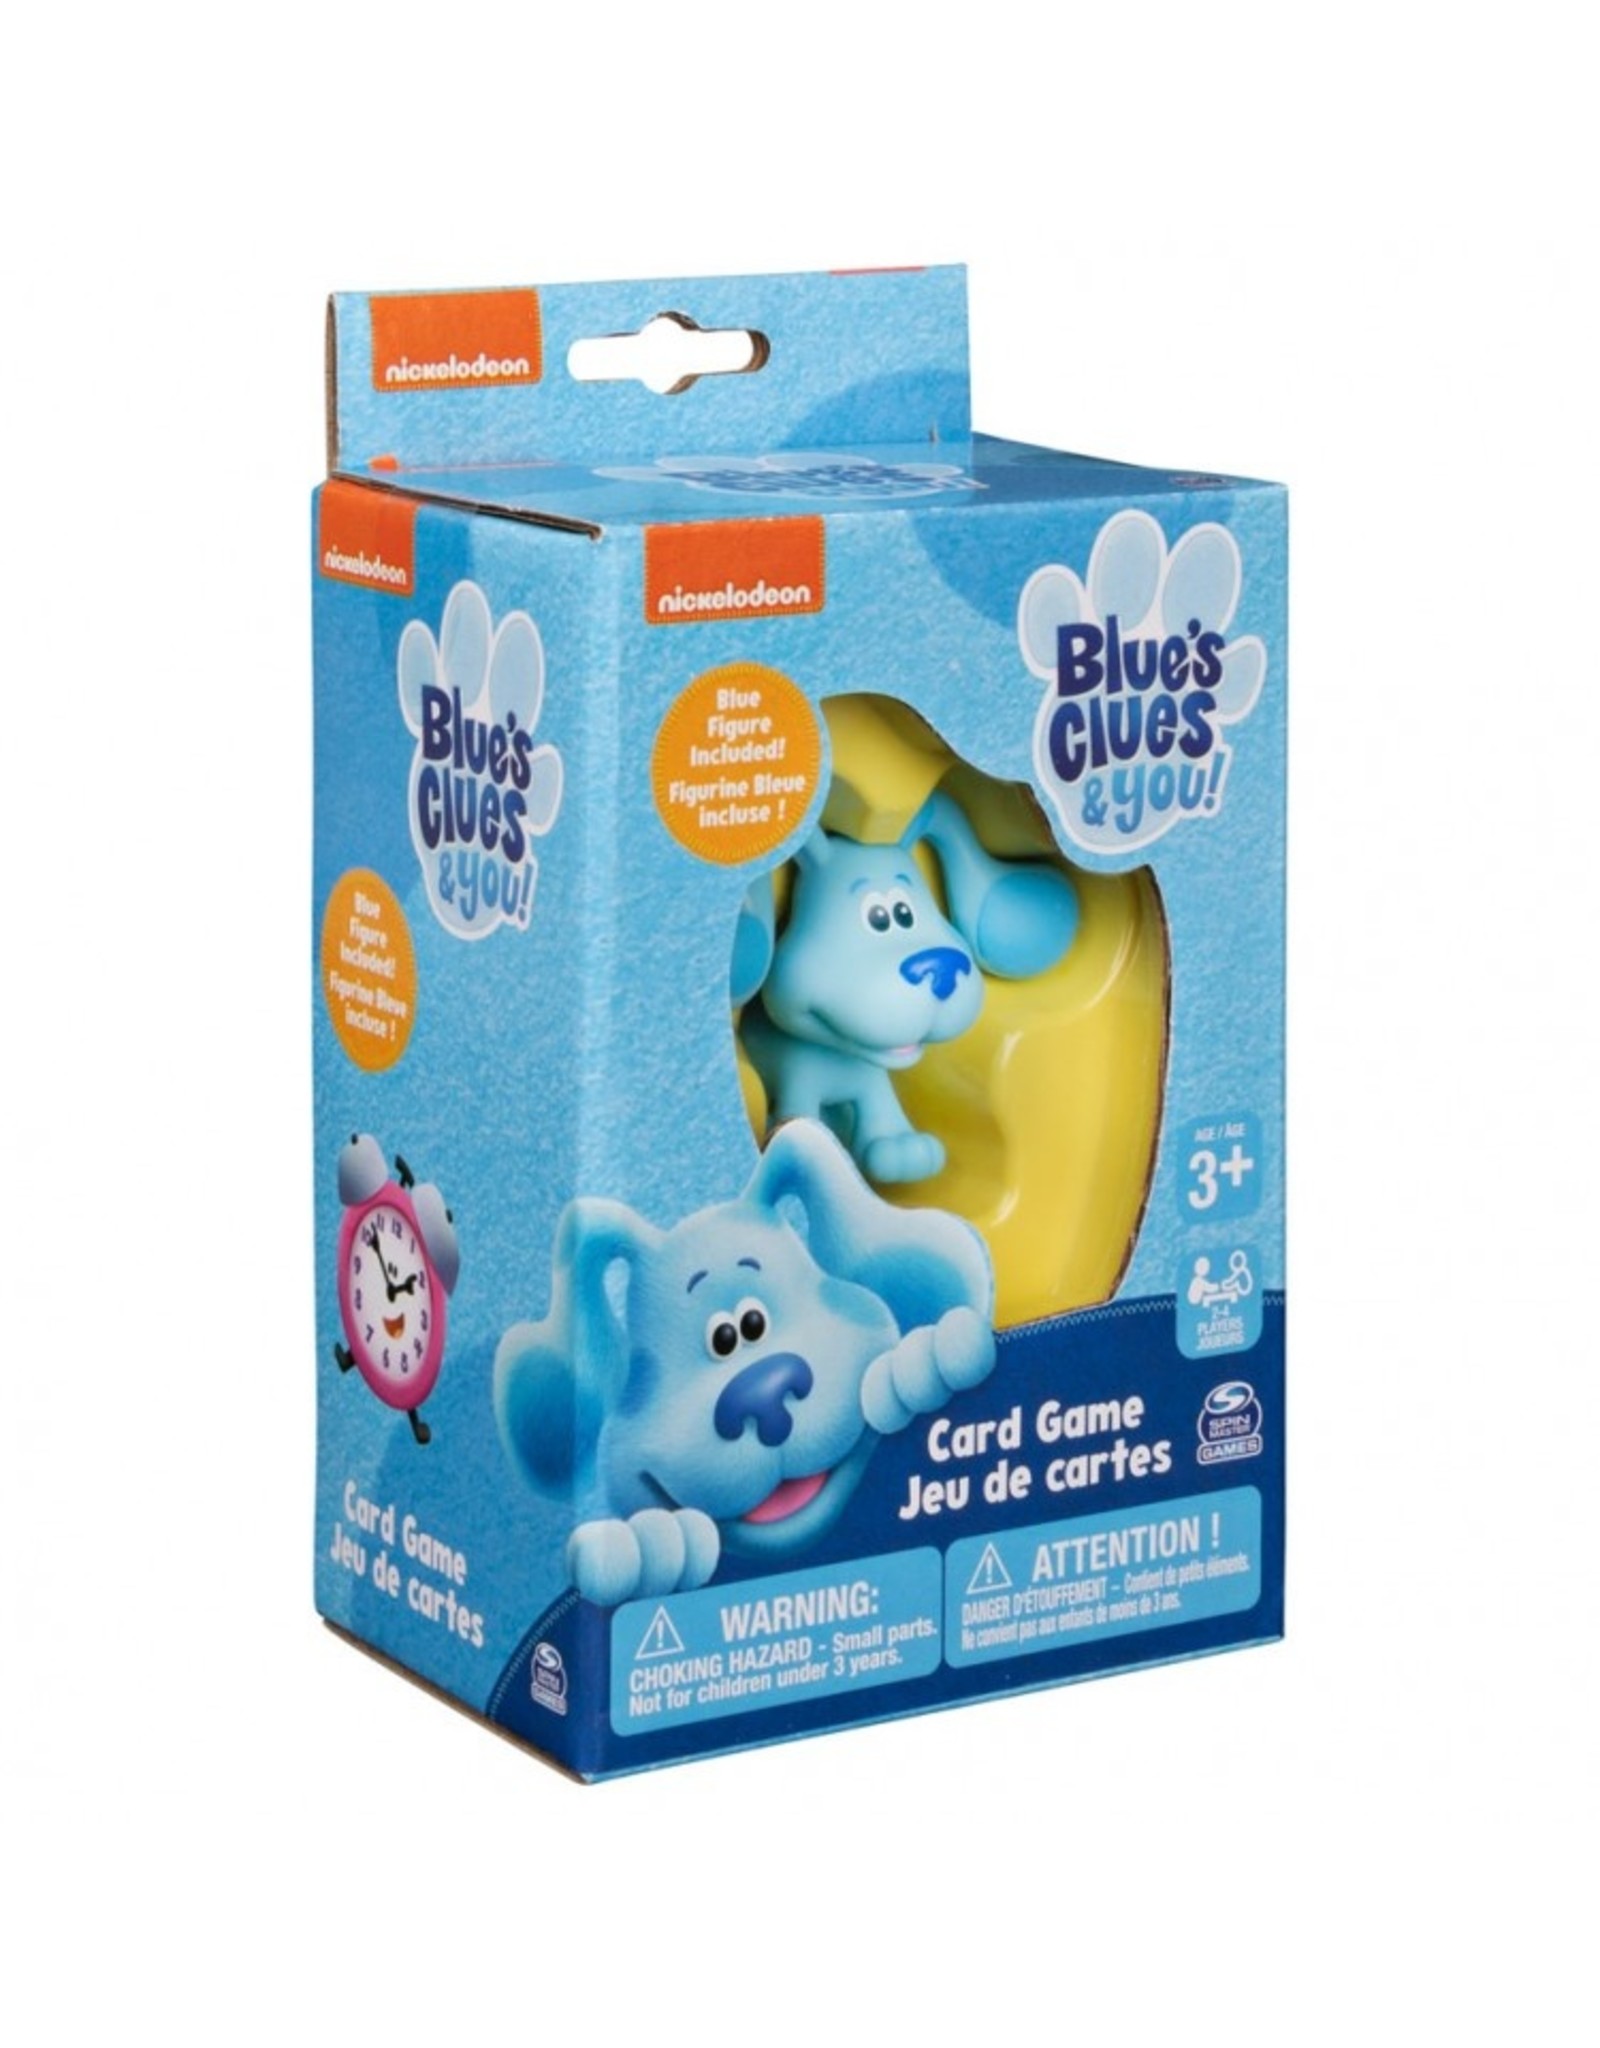 Spinmaster Blue's Clues Card Game (with figure)